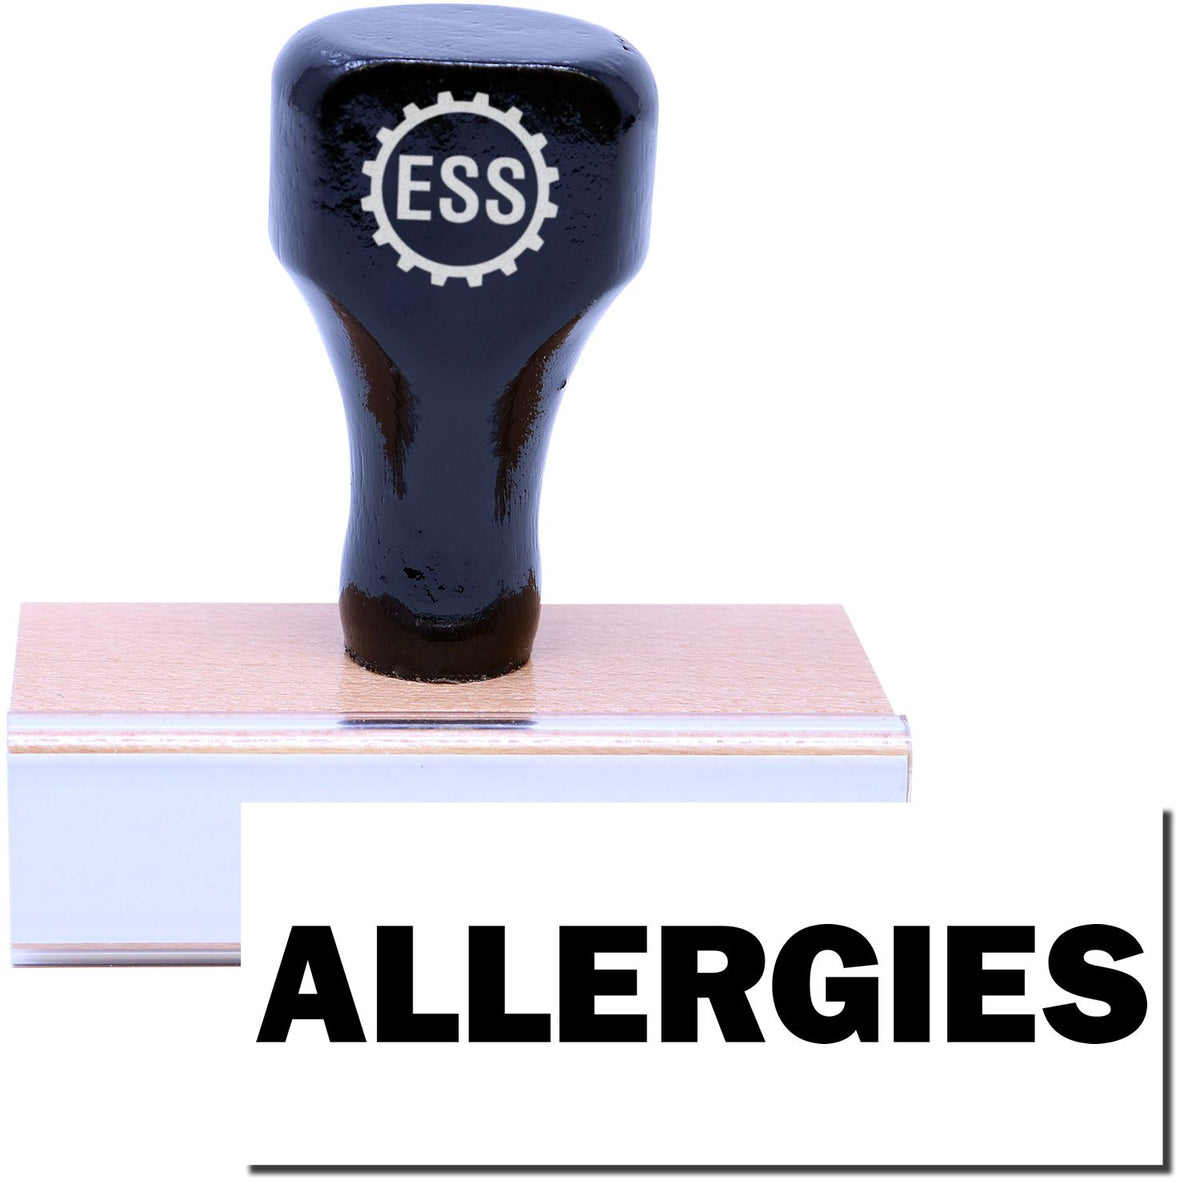 A stock office rubber stamp with a stamped image showing how the text &quot;ALLERGIES&quot; in a large font is displayed after stamping.